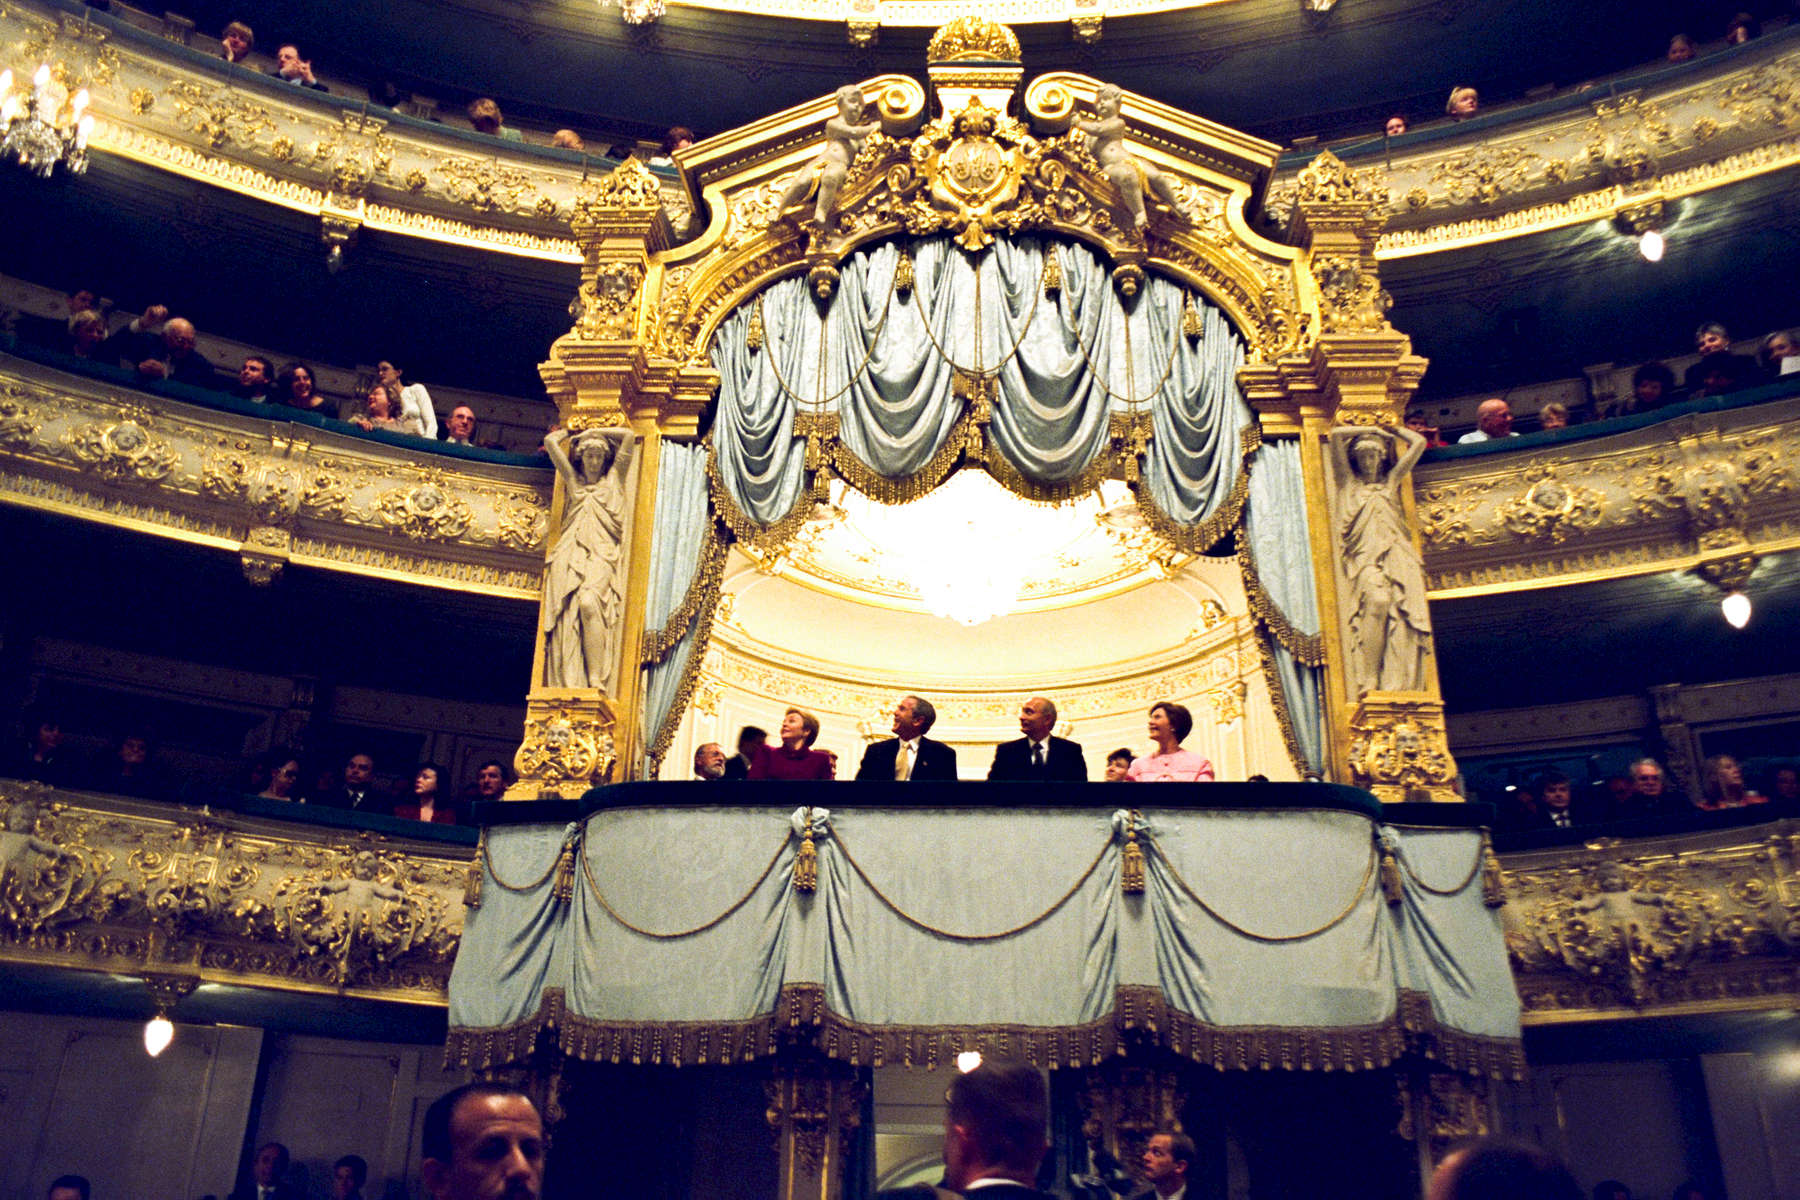 PRESIDENT BUSH AND LAURA BUSH ATTEND A PERFORMANCE AT THE MARIINSKIY THEATER IN ST. PETERSBURG, RUSSIA  WITH PRESIDENT VLADIMIR PUTIN AND HIS WIFE, LYUDMILA. Jumbo, web photo. Used in Bush Family Scrapbook May 1-May 28, 2002